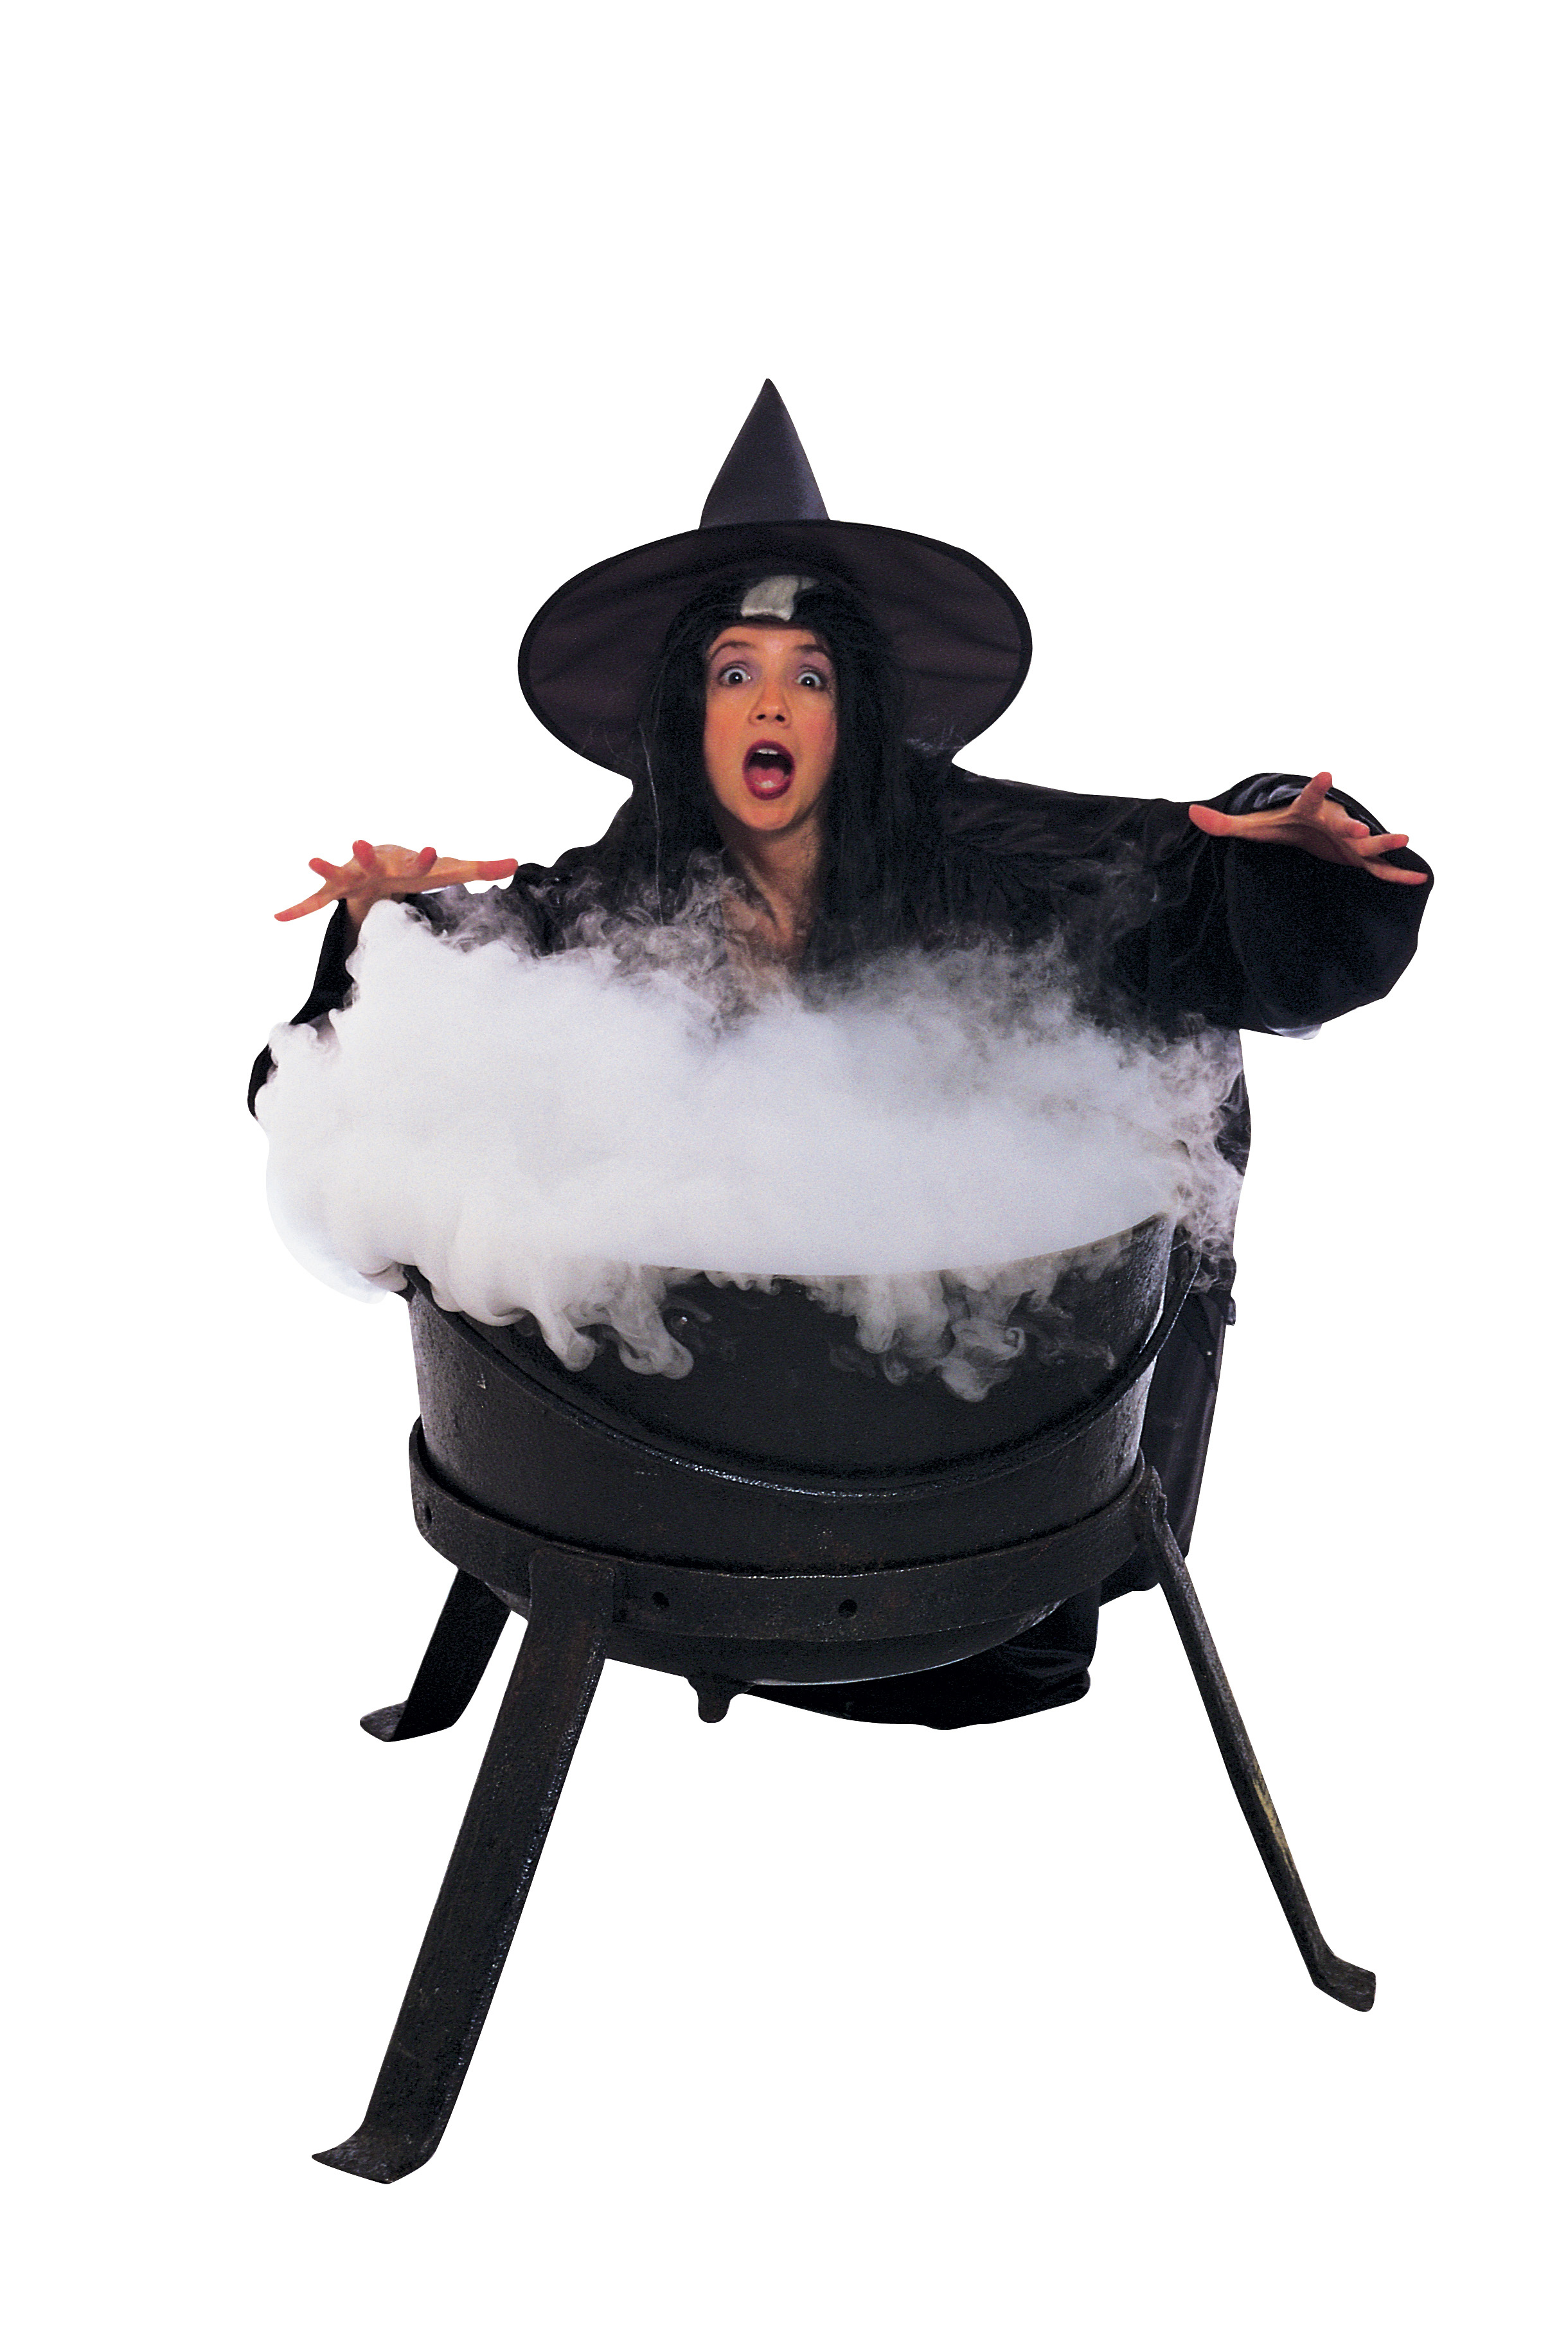 Boil Up Some Spooky Witches Brew for Halloween! - Dry Ice Corp